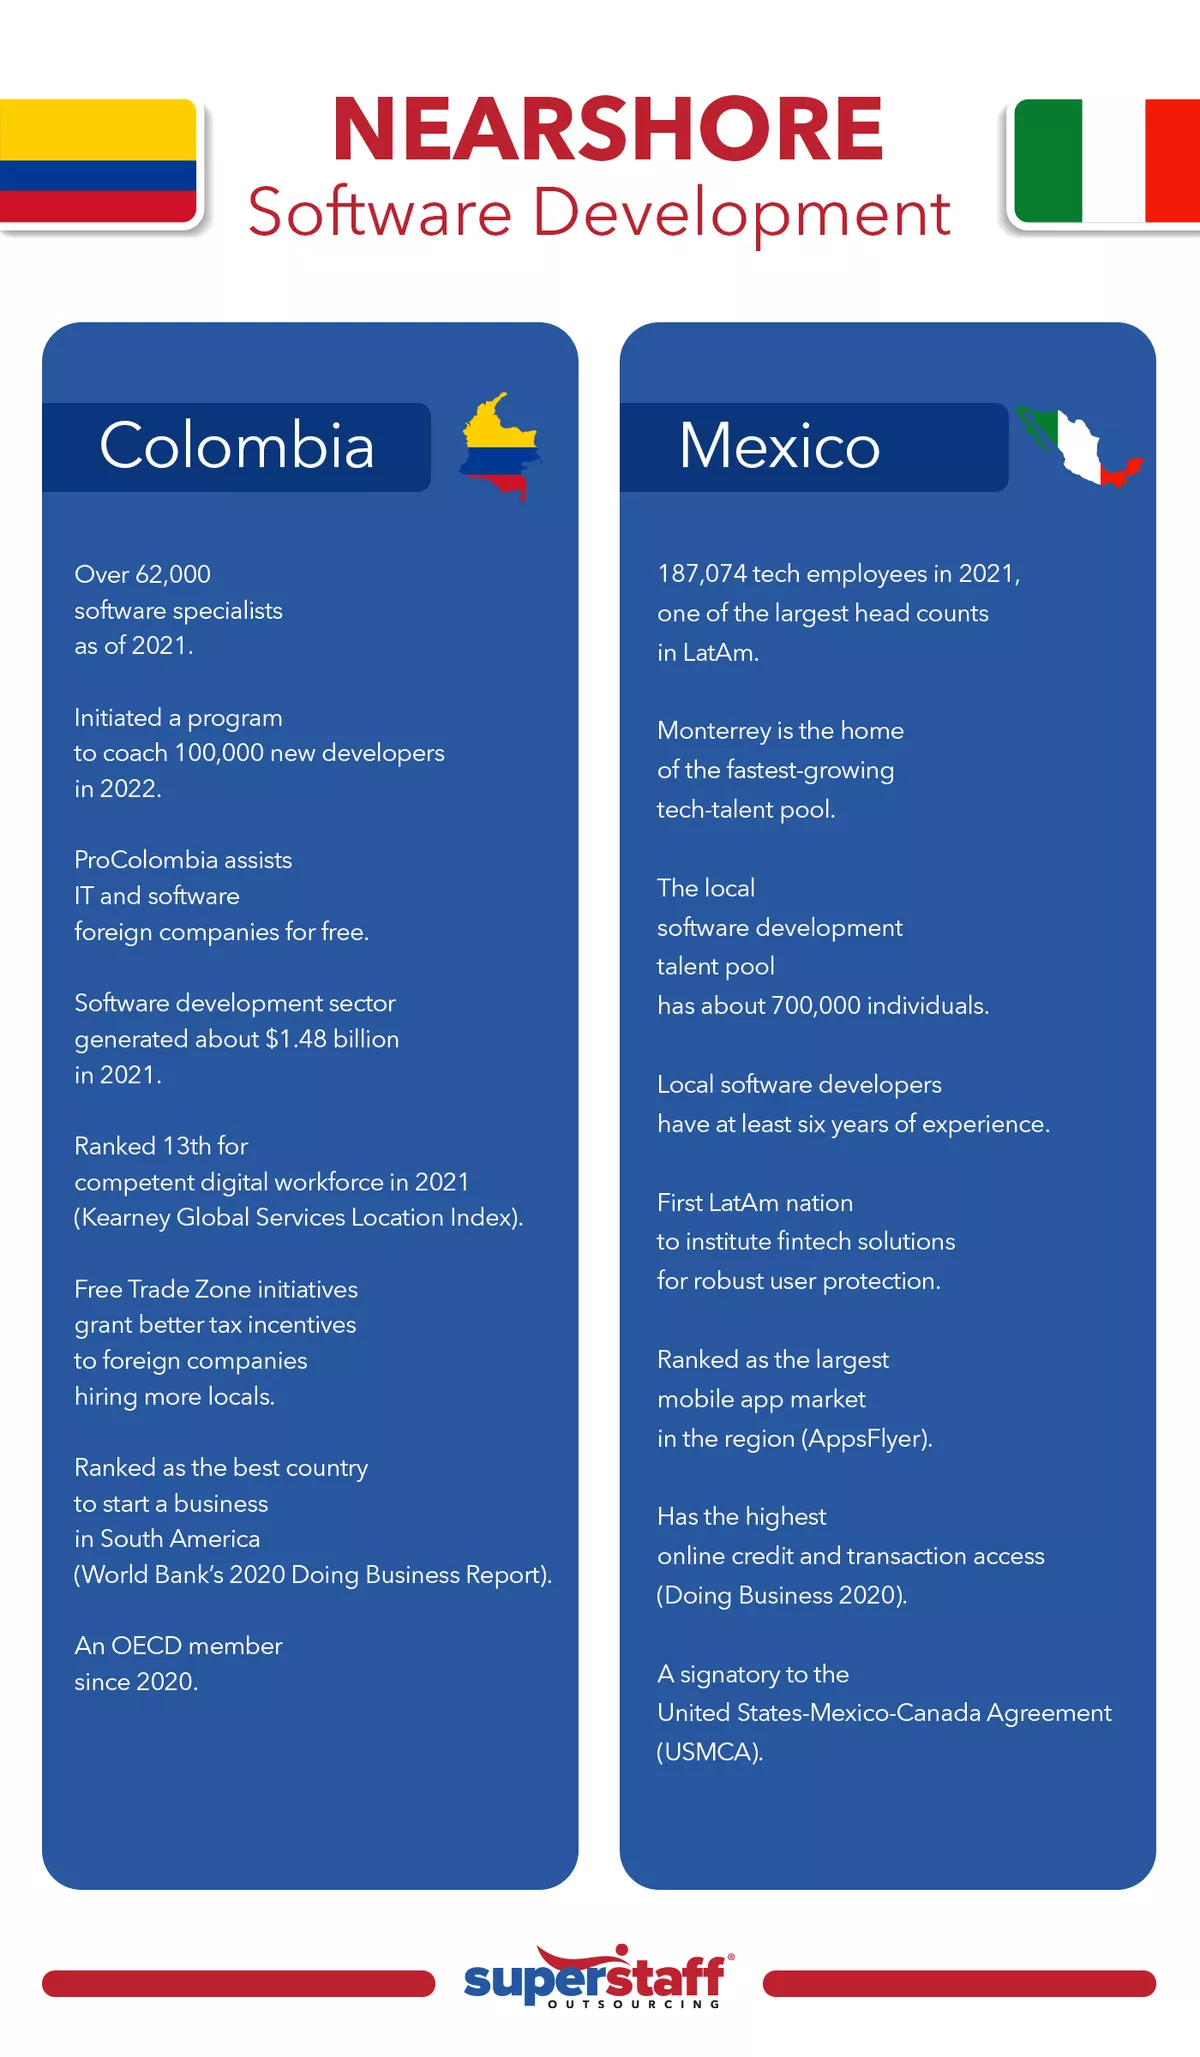 An infographic compares nearshore technology outsourcing between Colombia and Mexico.